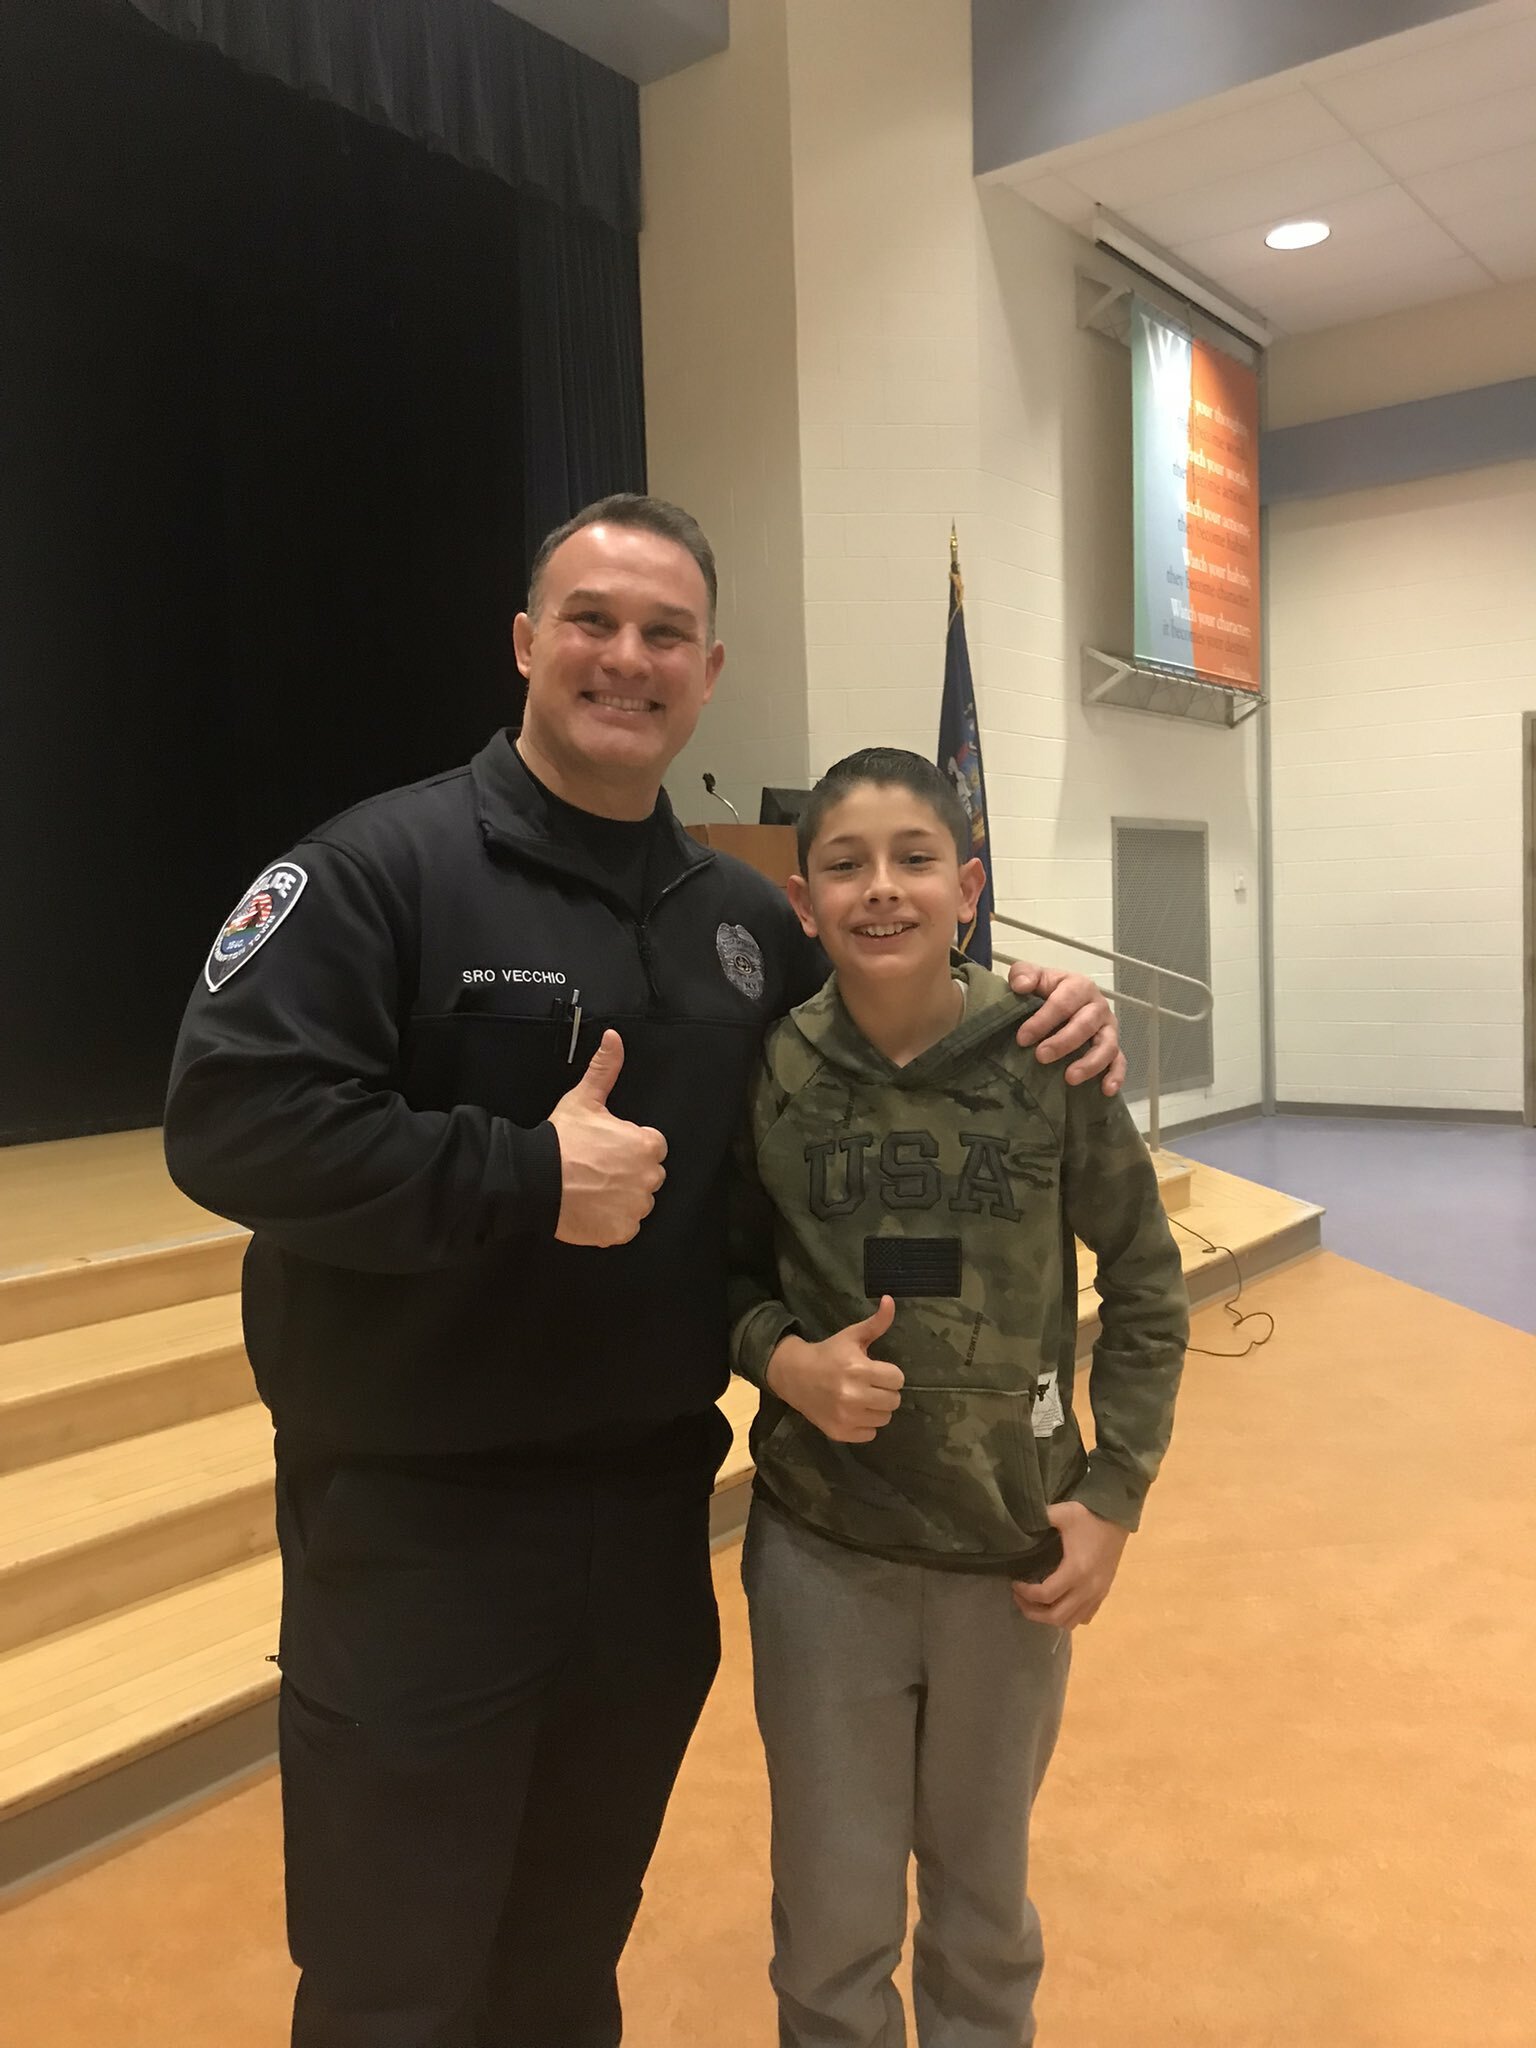 Hampton Bays Middle School students, including Santiago Cortez Molina, recently participated in an antibullying assembly with School Resource Officer Tony Vecchio of the Southampton Town Police Department. Officer Vecchio spoke to students about in-person and online bullying, internet safety and the importance of treating each other with kindness. COURTESY HAMPTON BAYS SCHOOL DISTRICT